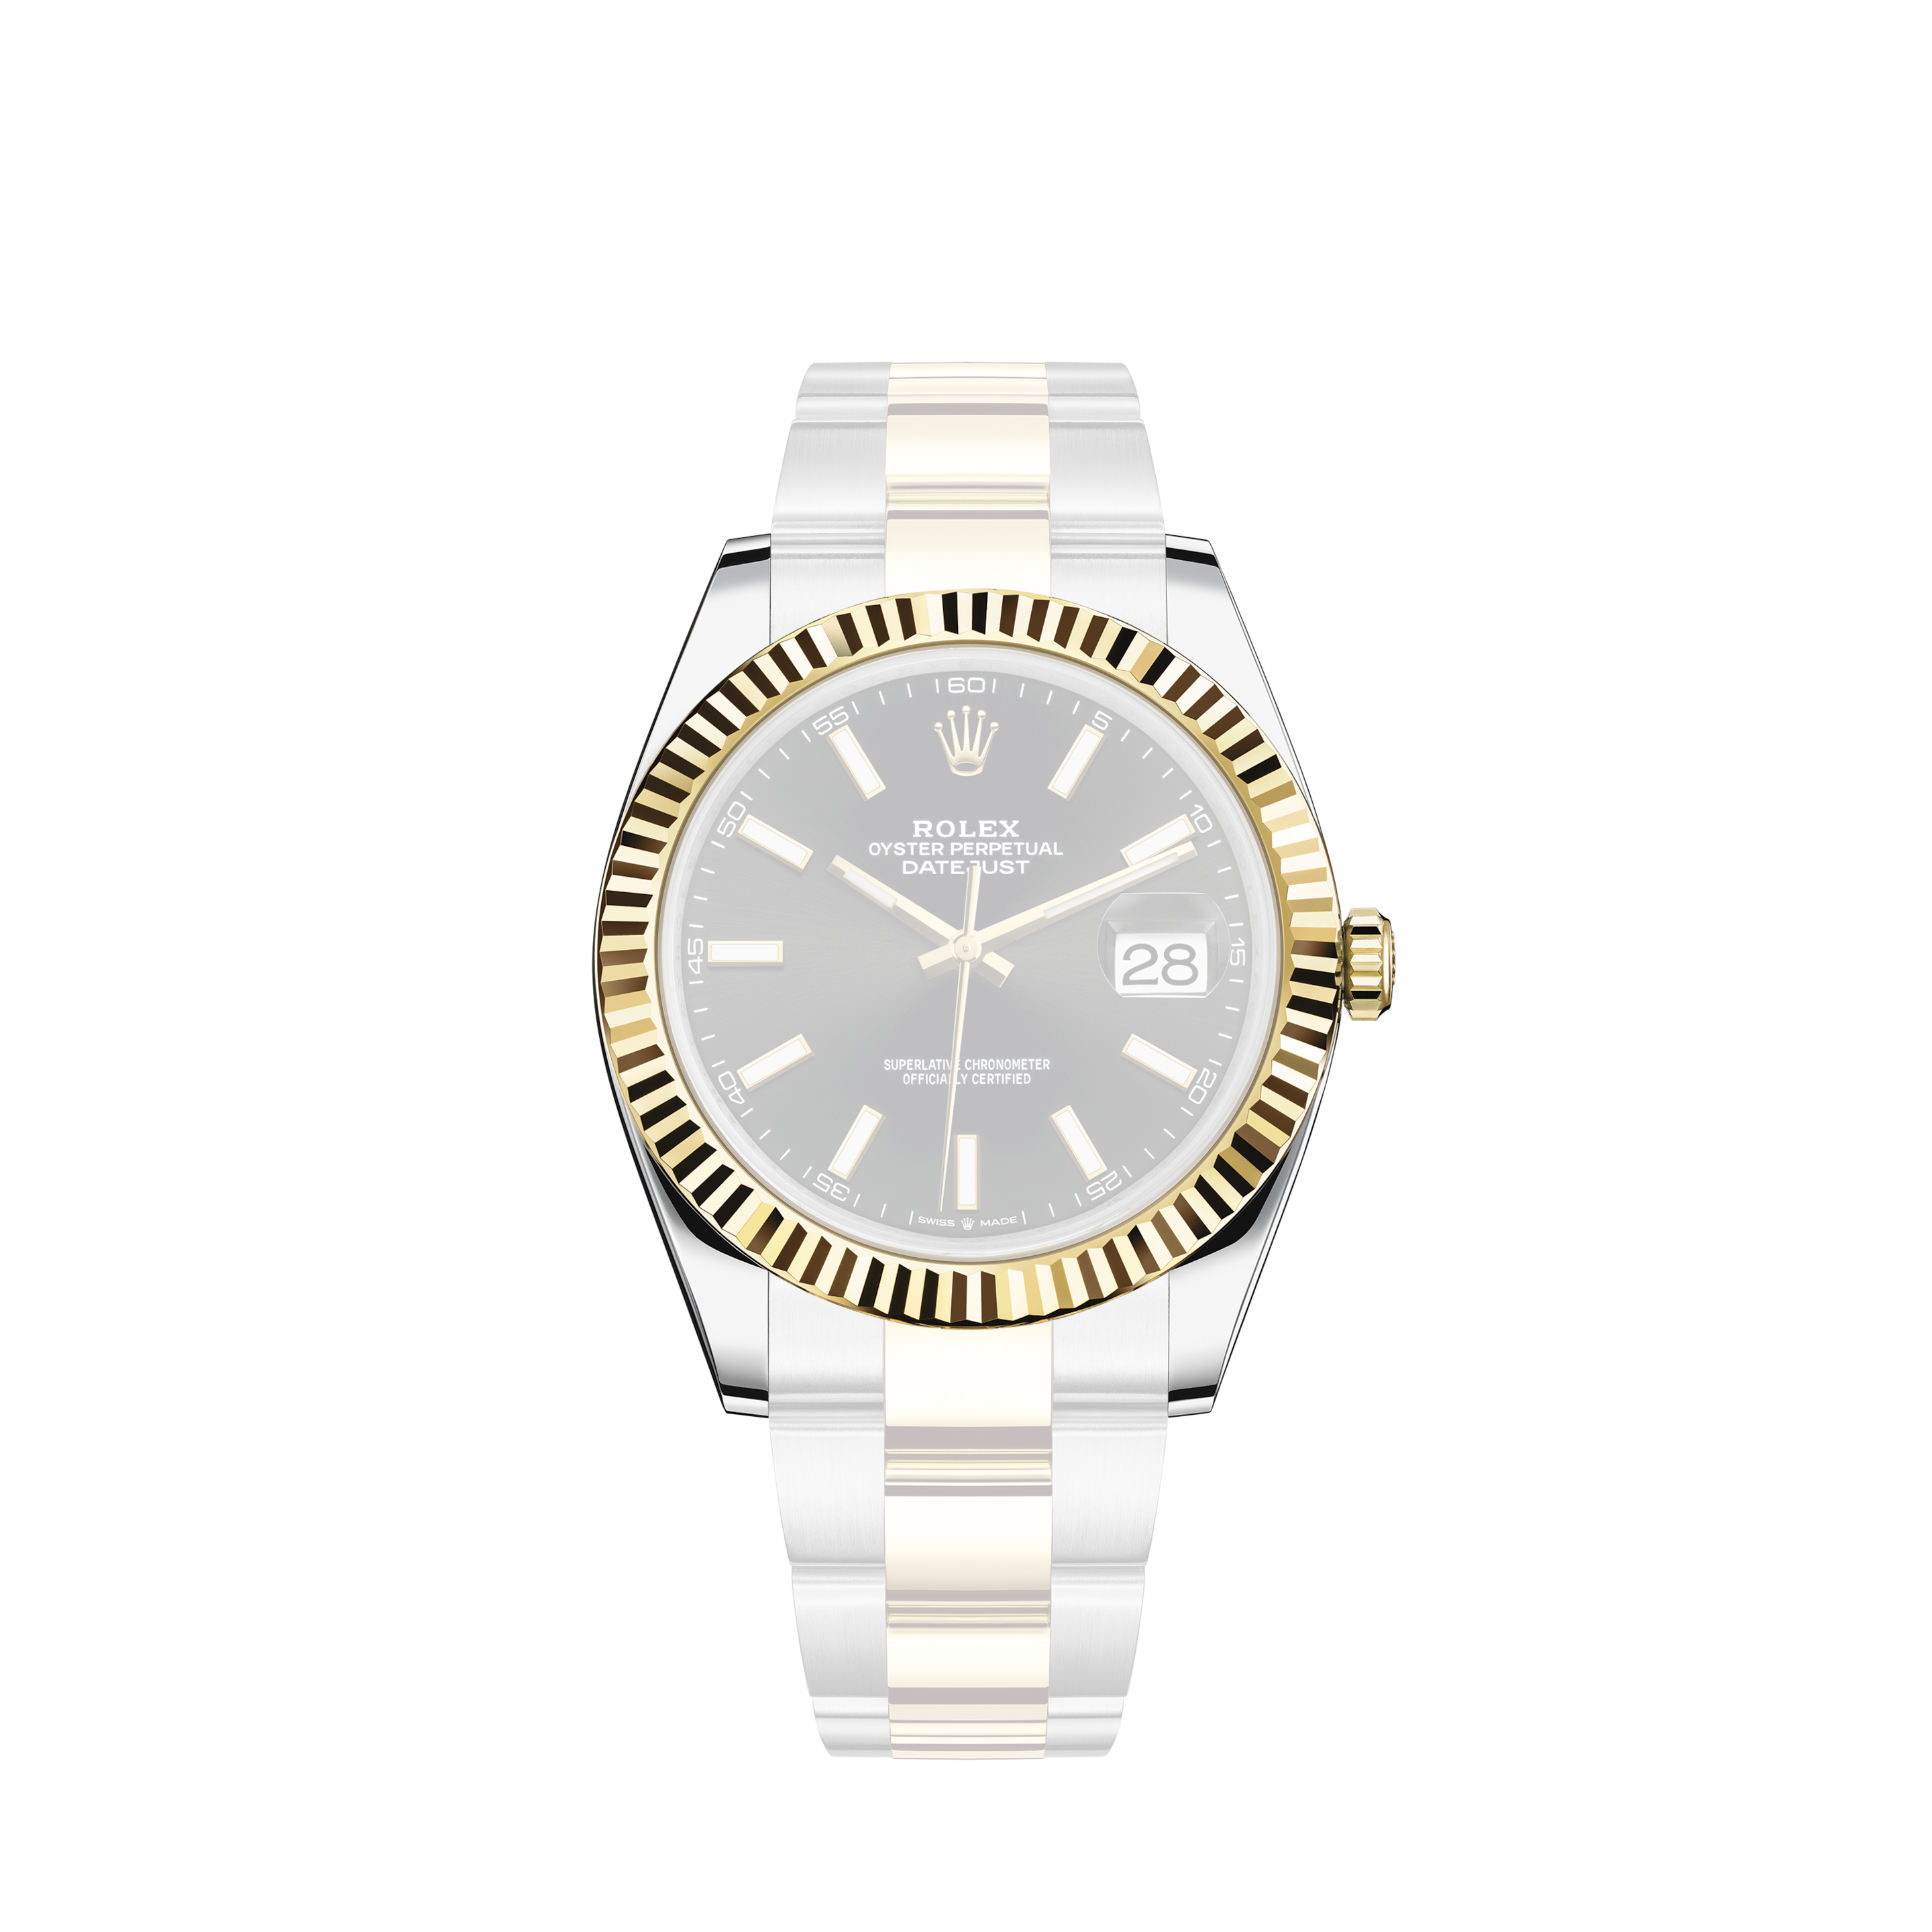 Rolex Oyster Perpetual Ref.6634 34mm Cal.1030 Gold-Capped Automatic Vintage 1958 Swiss Made